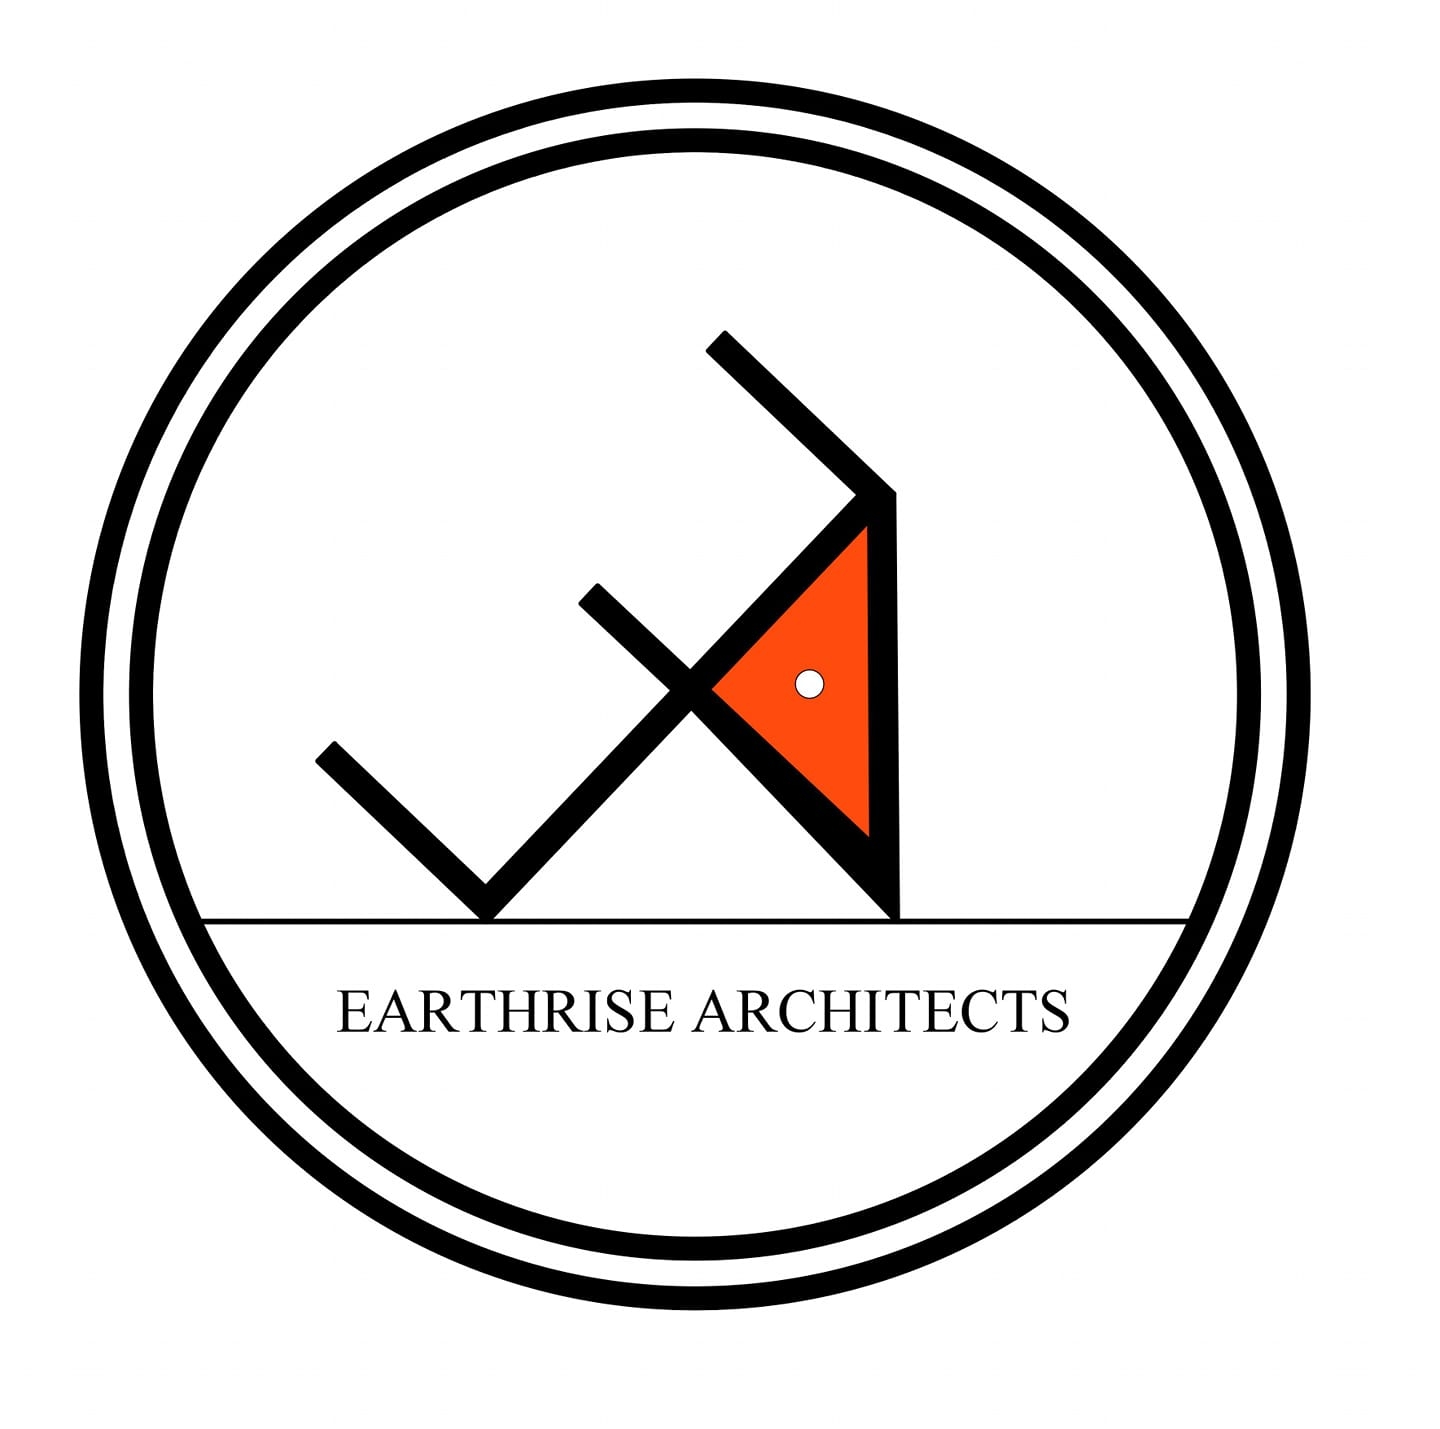 Earthrise Architects|Accounting Services|Professional Services